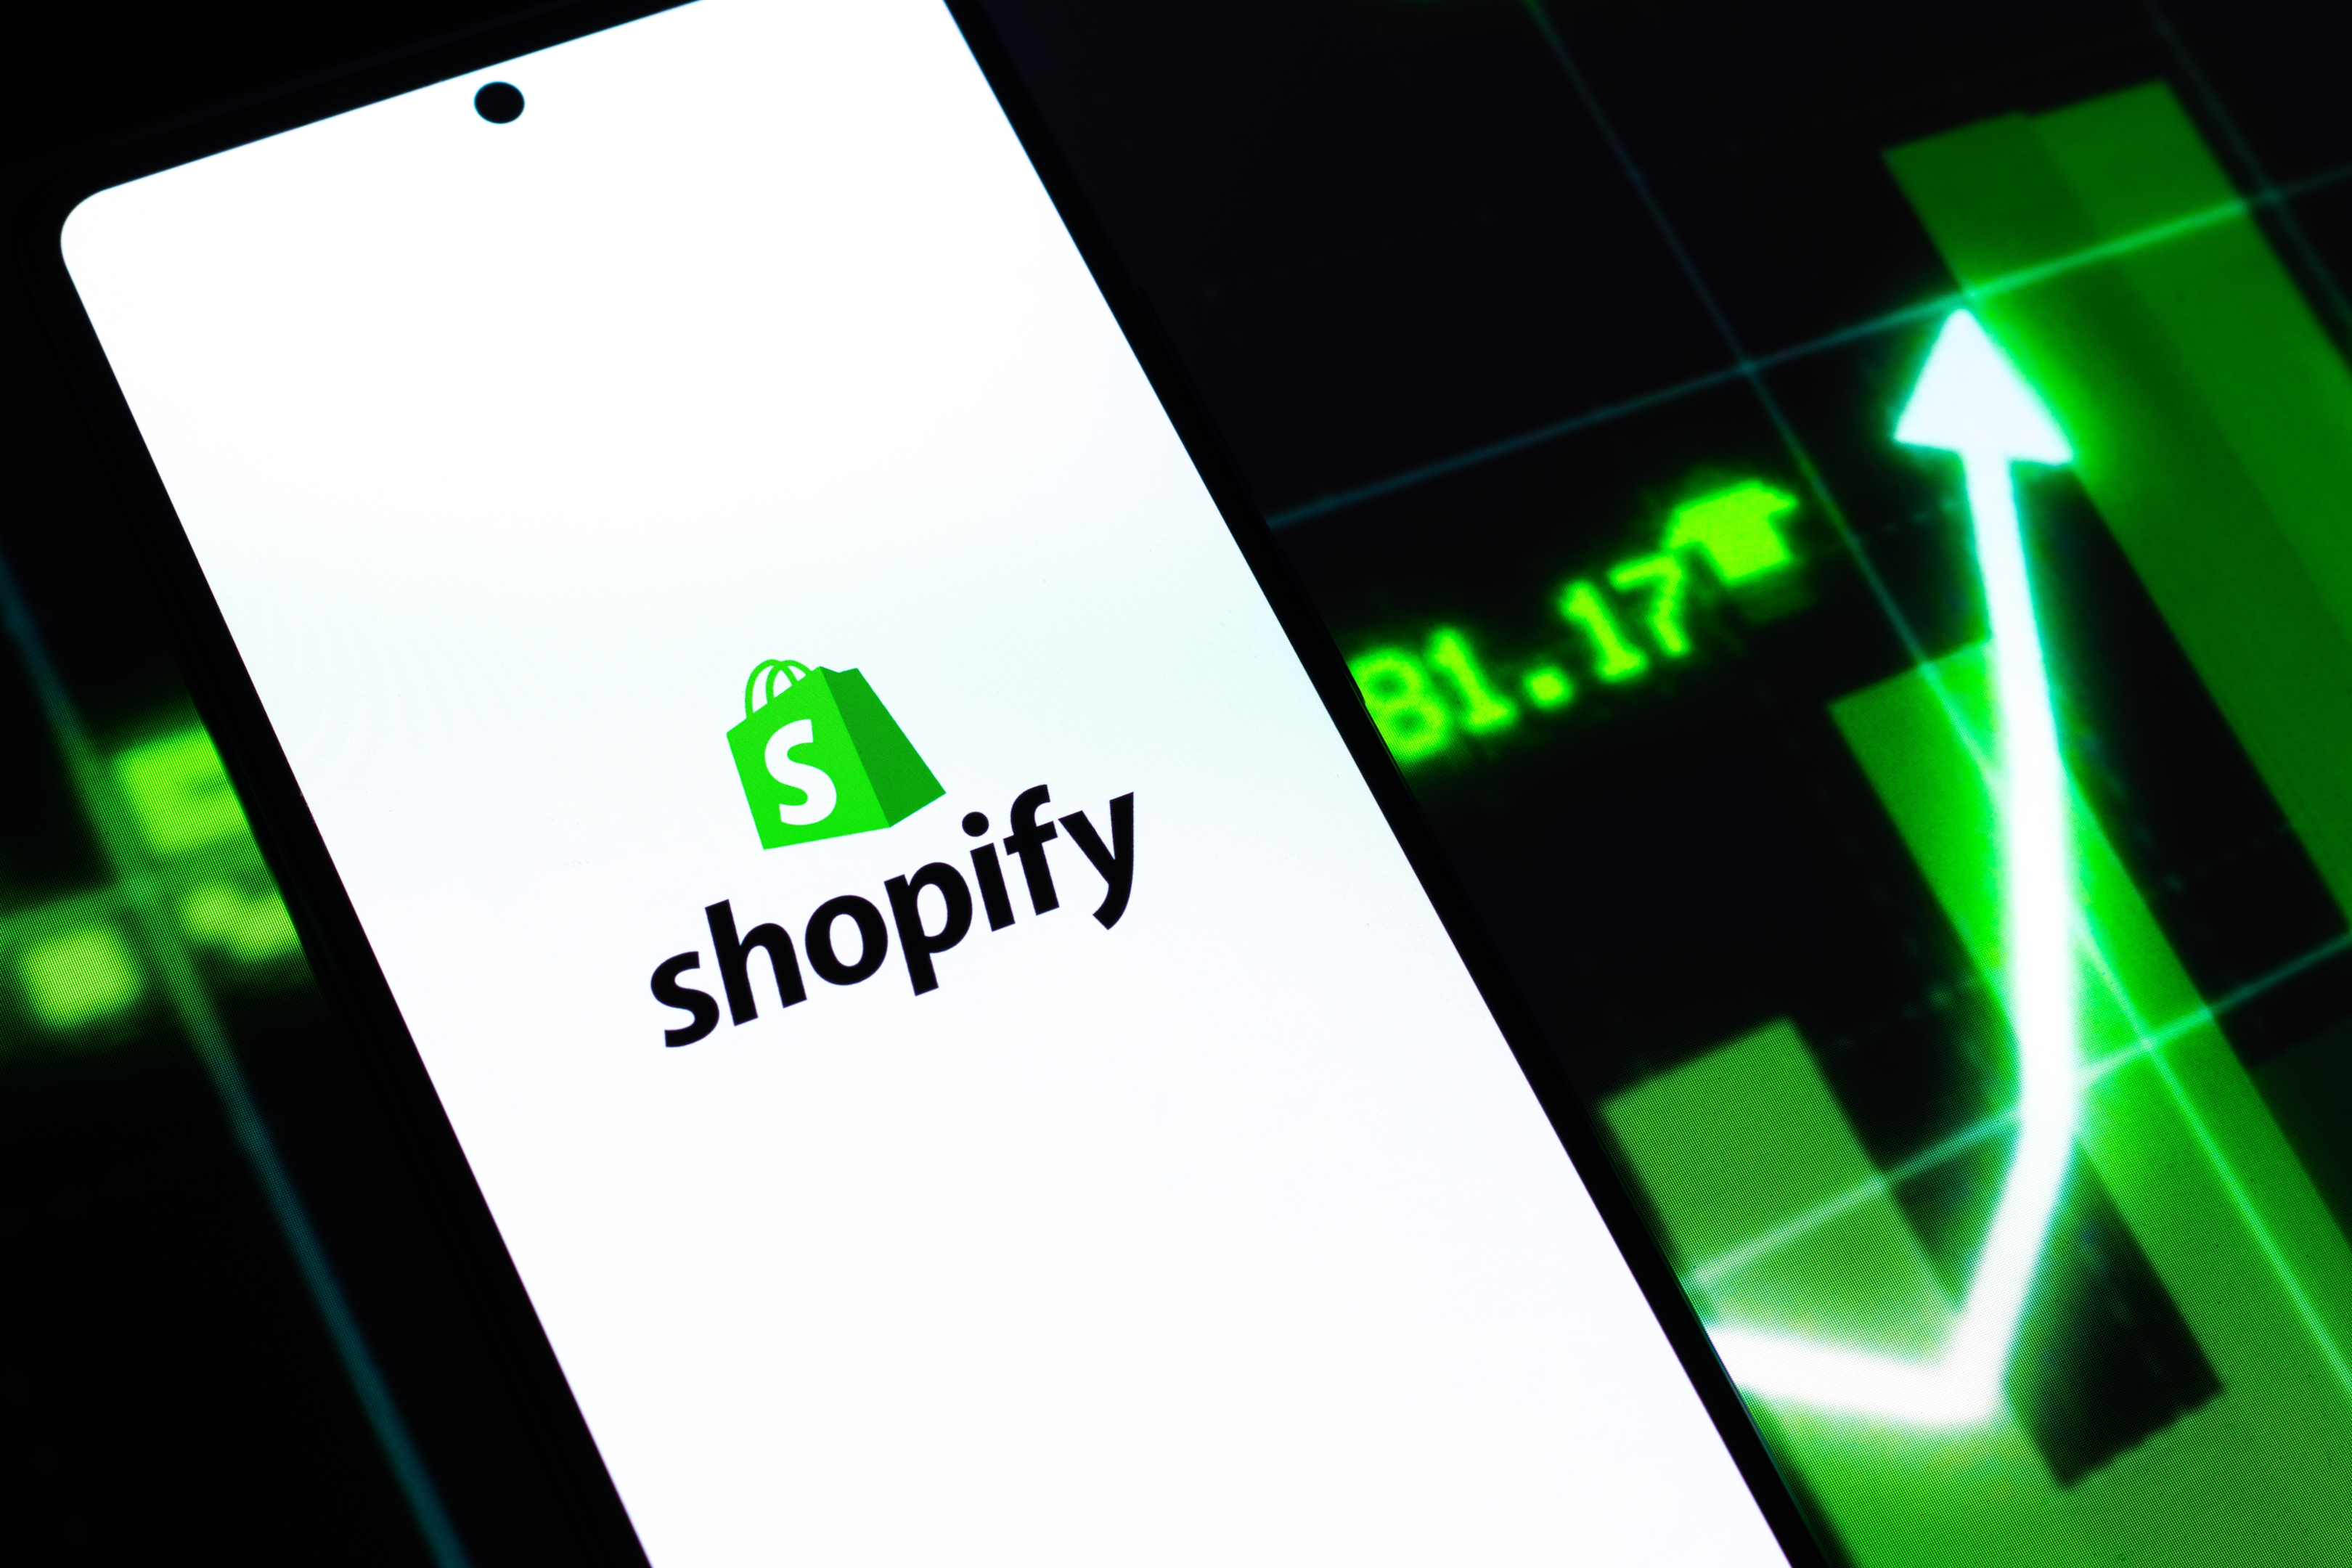 Shopify Seo Specialist What Services Does A Shopify Seo Specialist Offer?